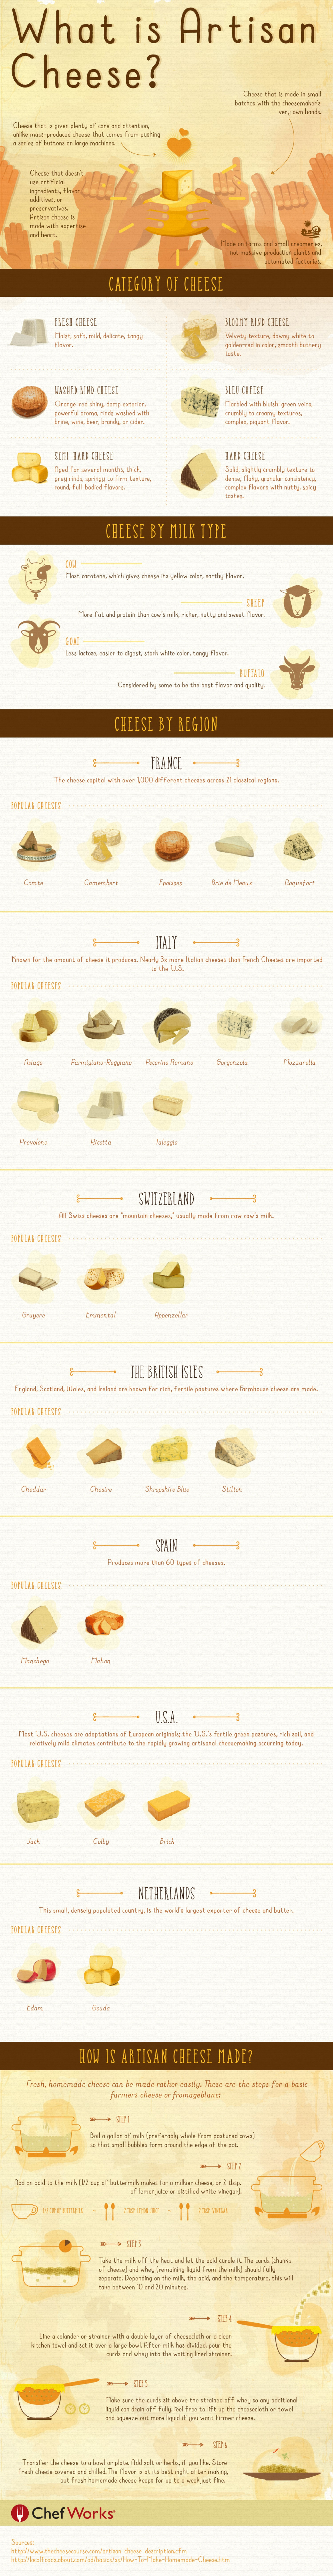 What is Artisan Cheese